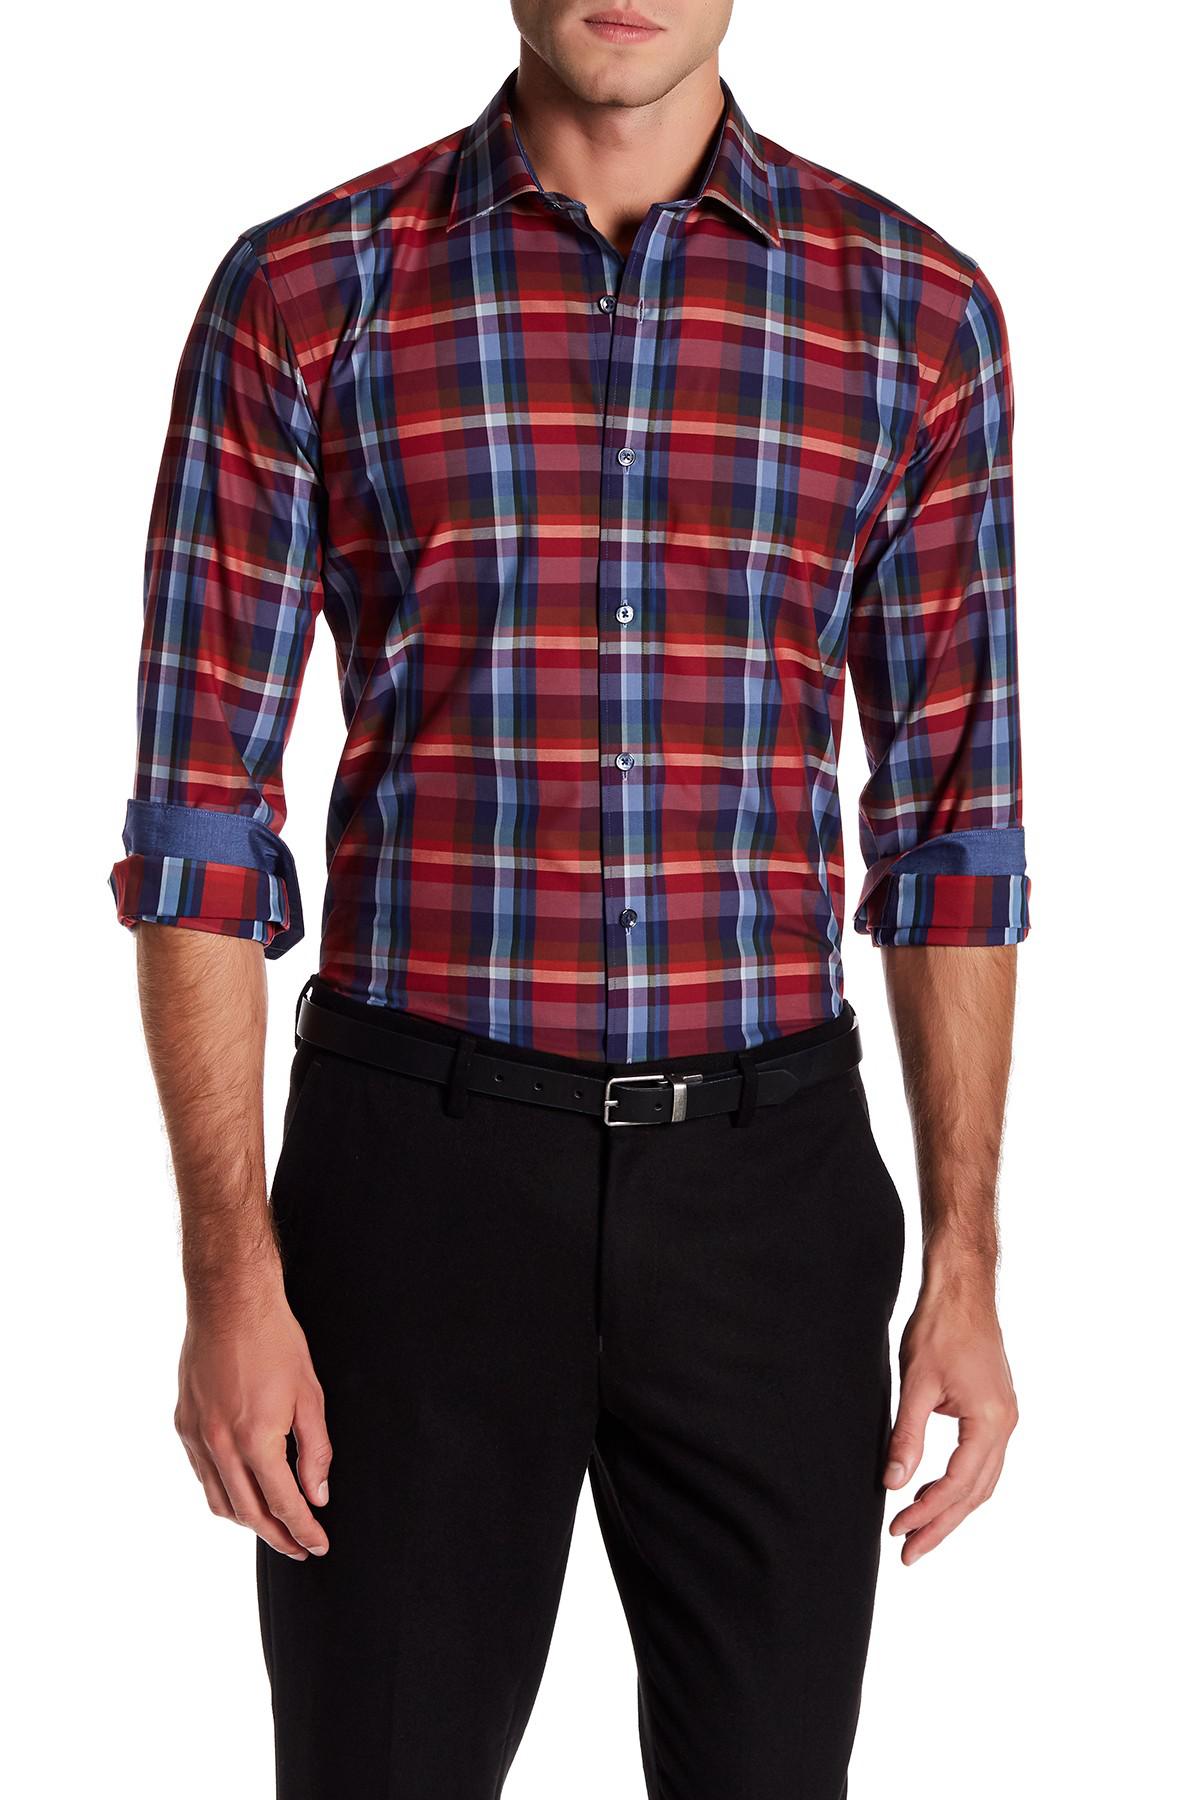 Lyst - Bugatchi Plaid Woven Shaped Fit Shirt in Red for Men